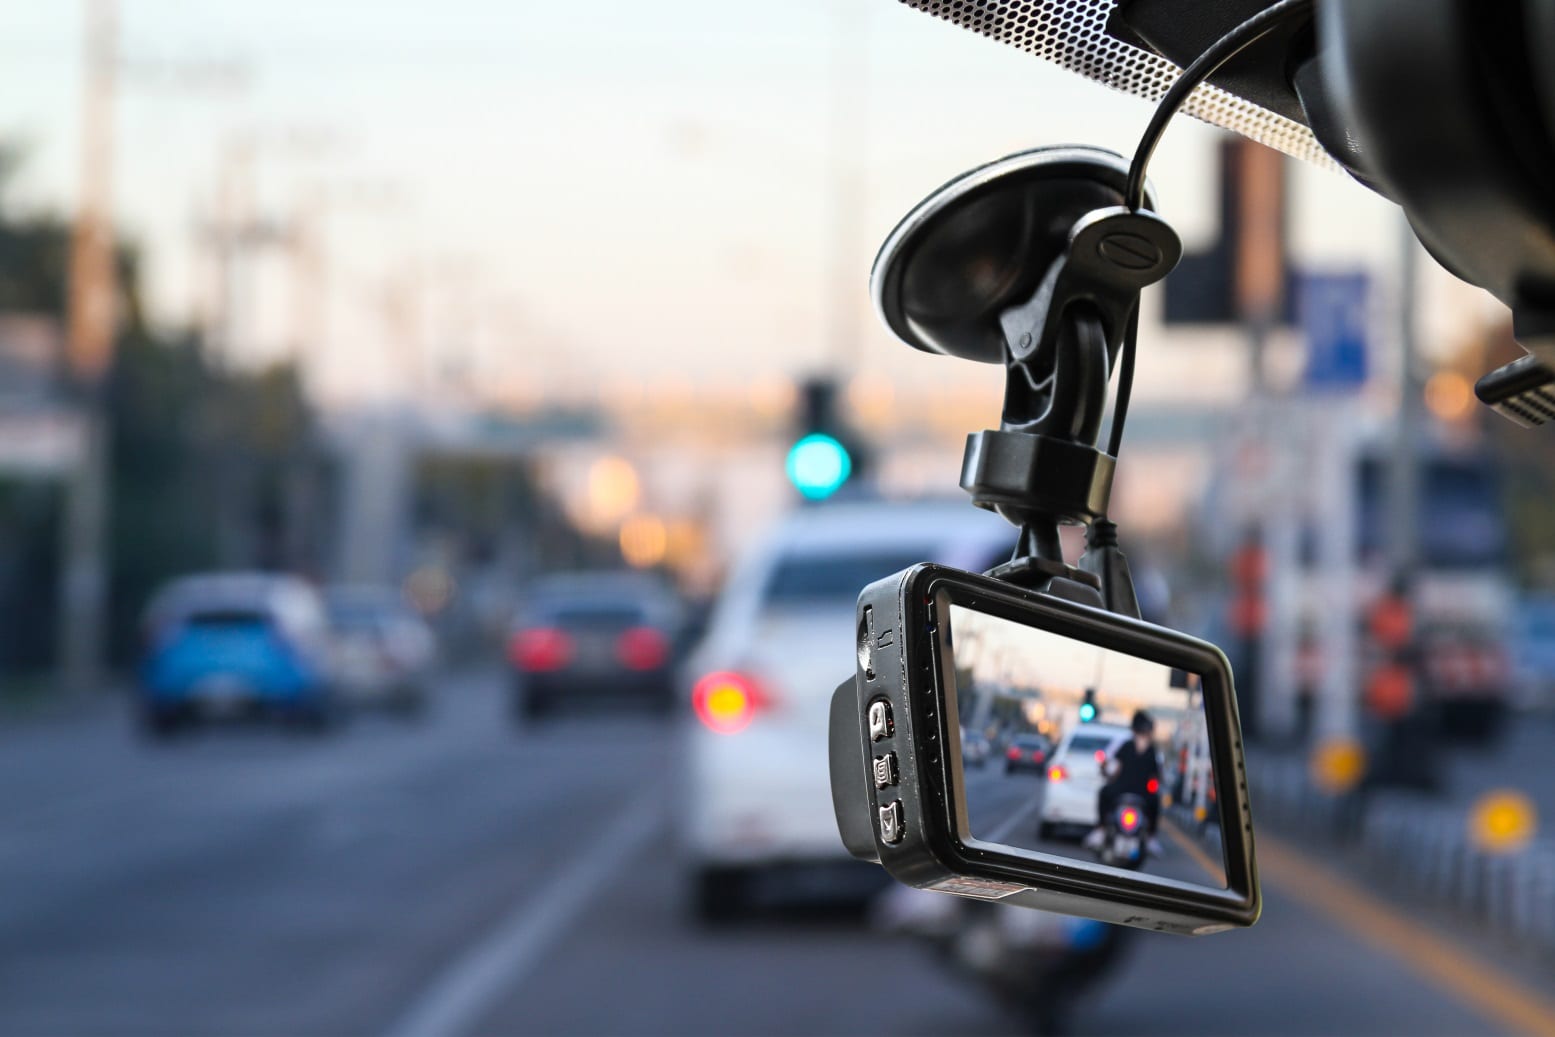 https://www.dayinsure.com/wp-content/uploads/2019/09/What-to-look-for-when-buying-a-dashcam.jpg